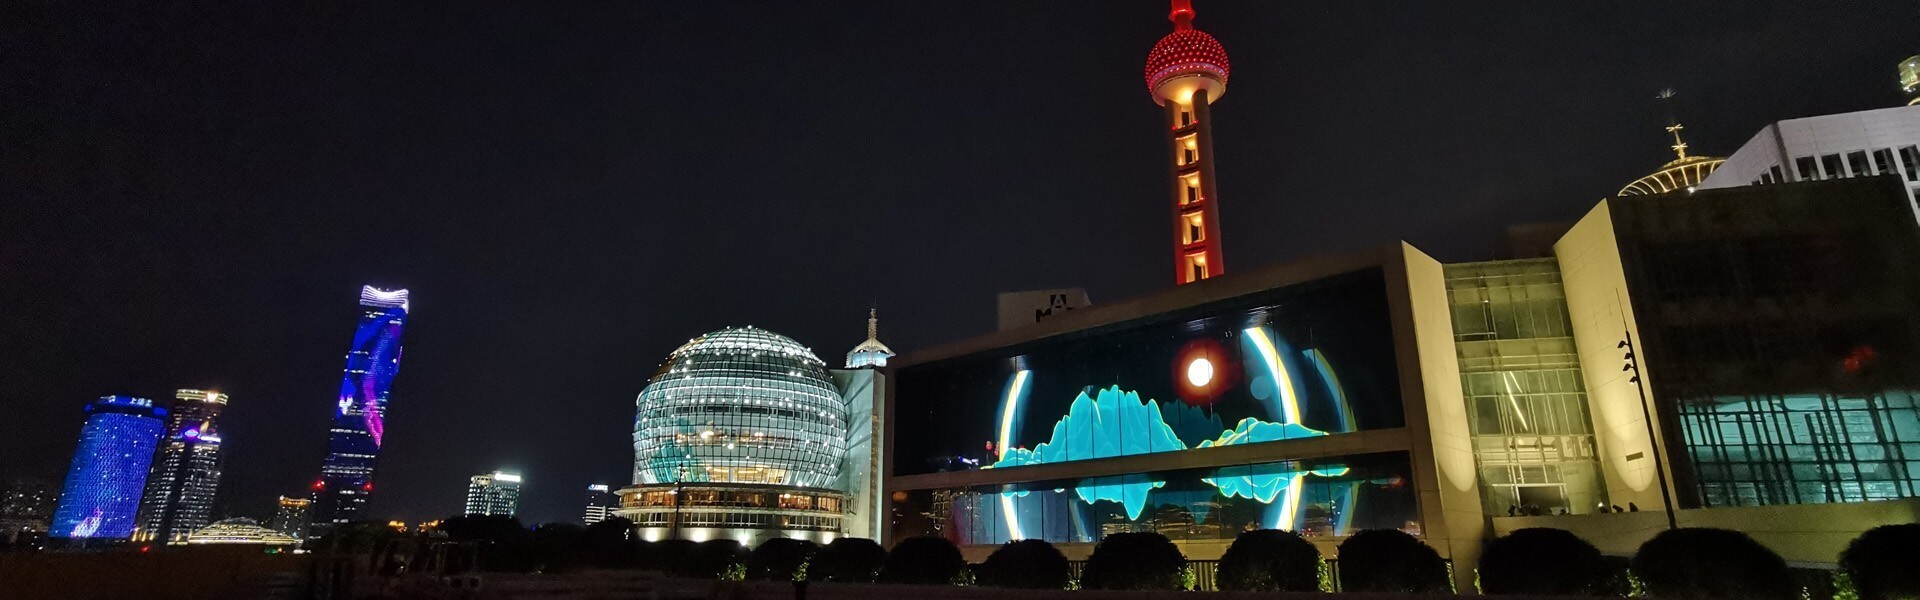 Landing on “The Bund”! LianTronics Accomplished Shanghai’s Largest Outdoor Small-pitch LED Wall